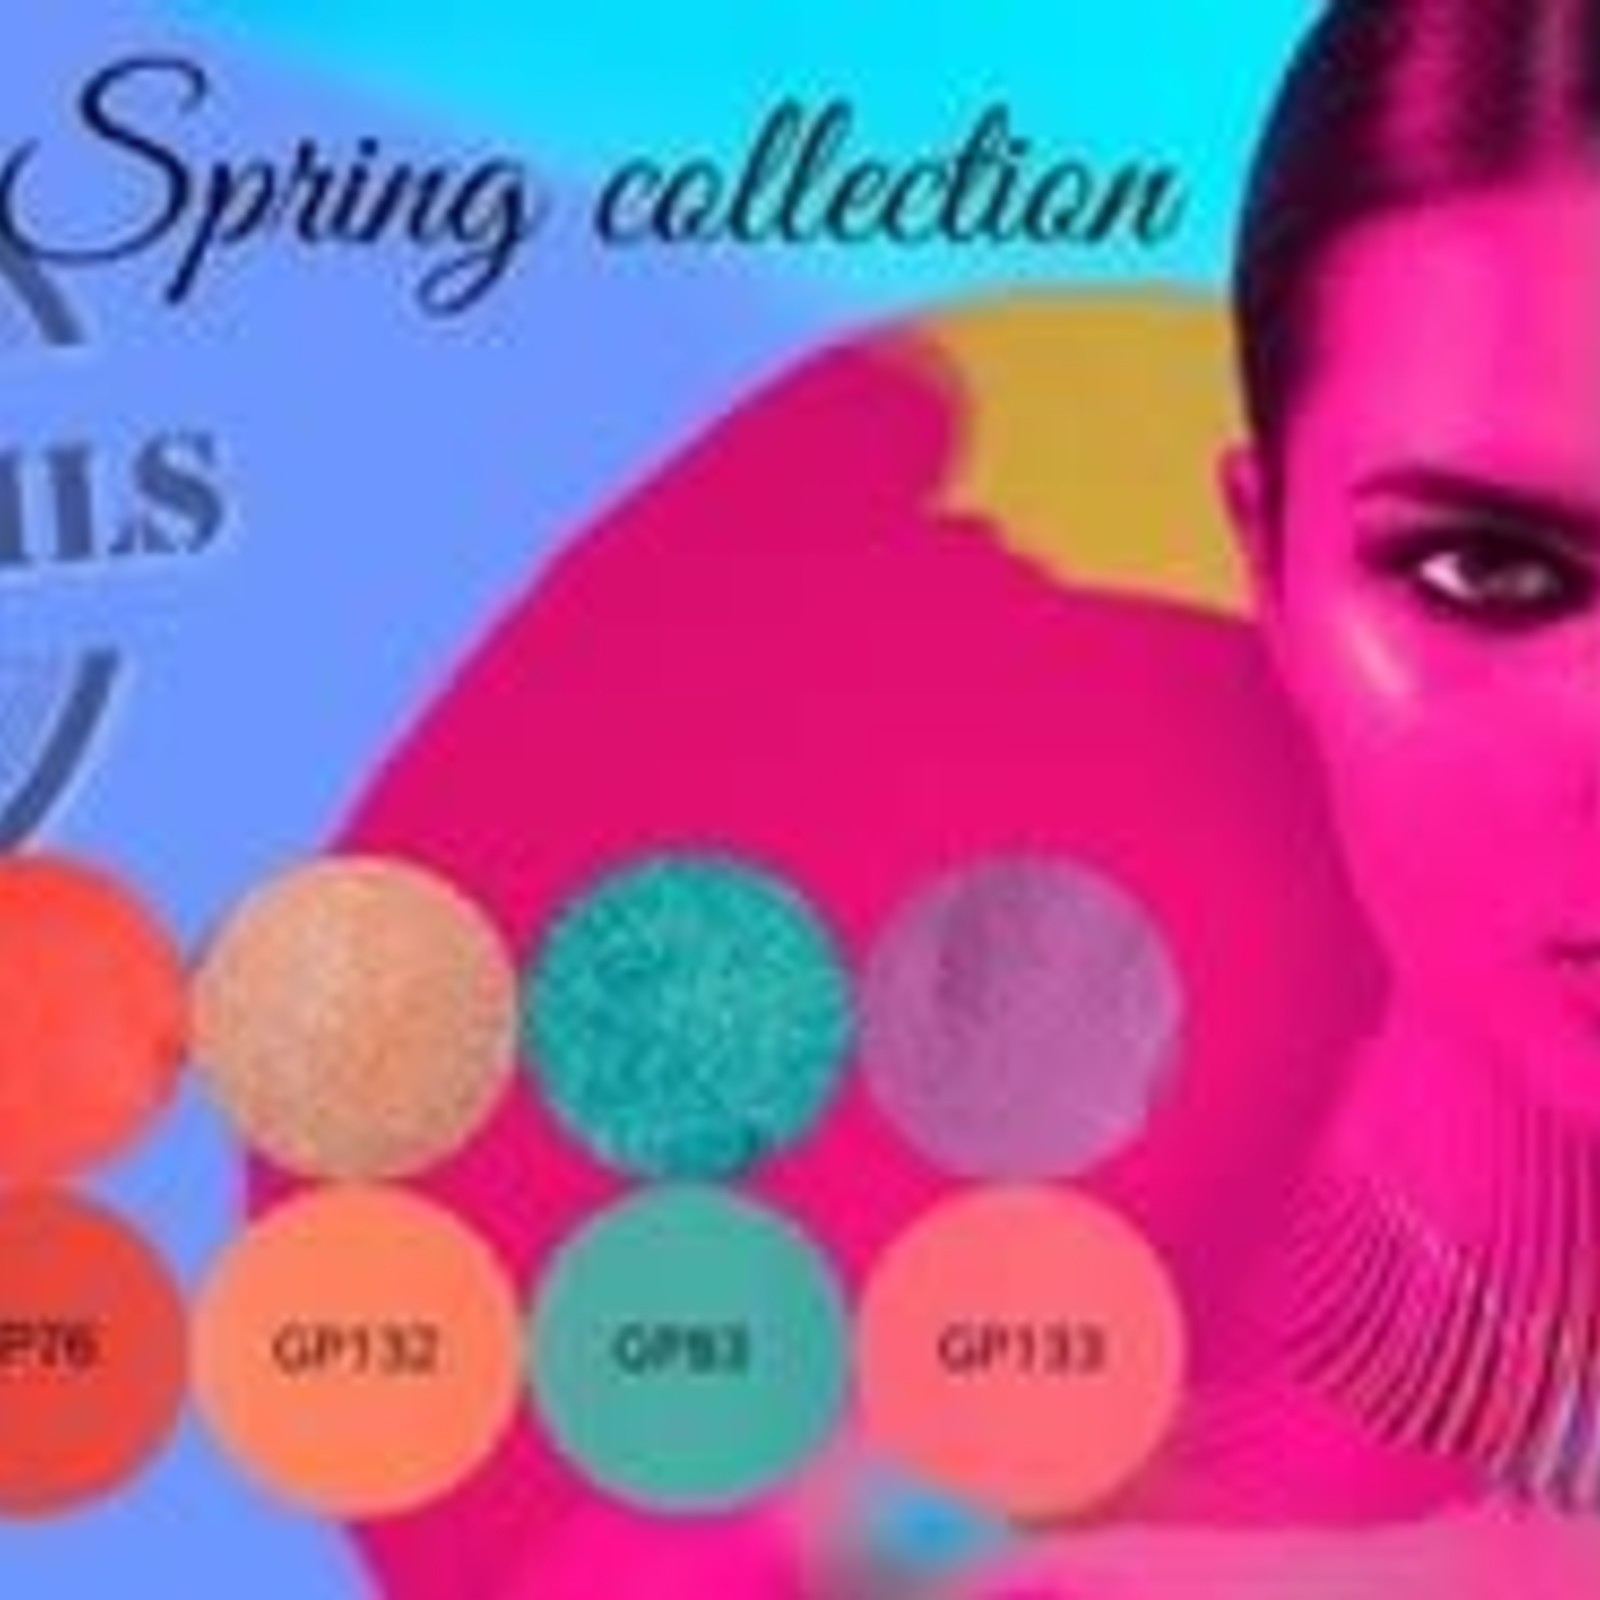 Urban nails Spring Glitter collection